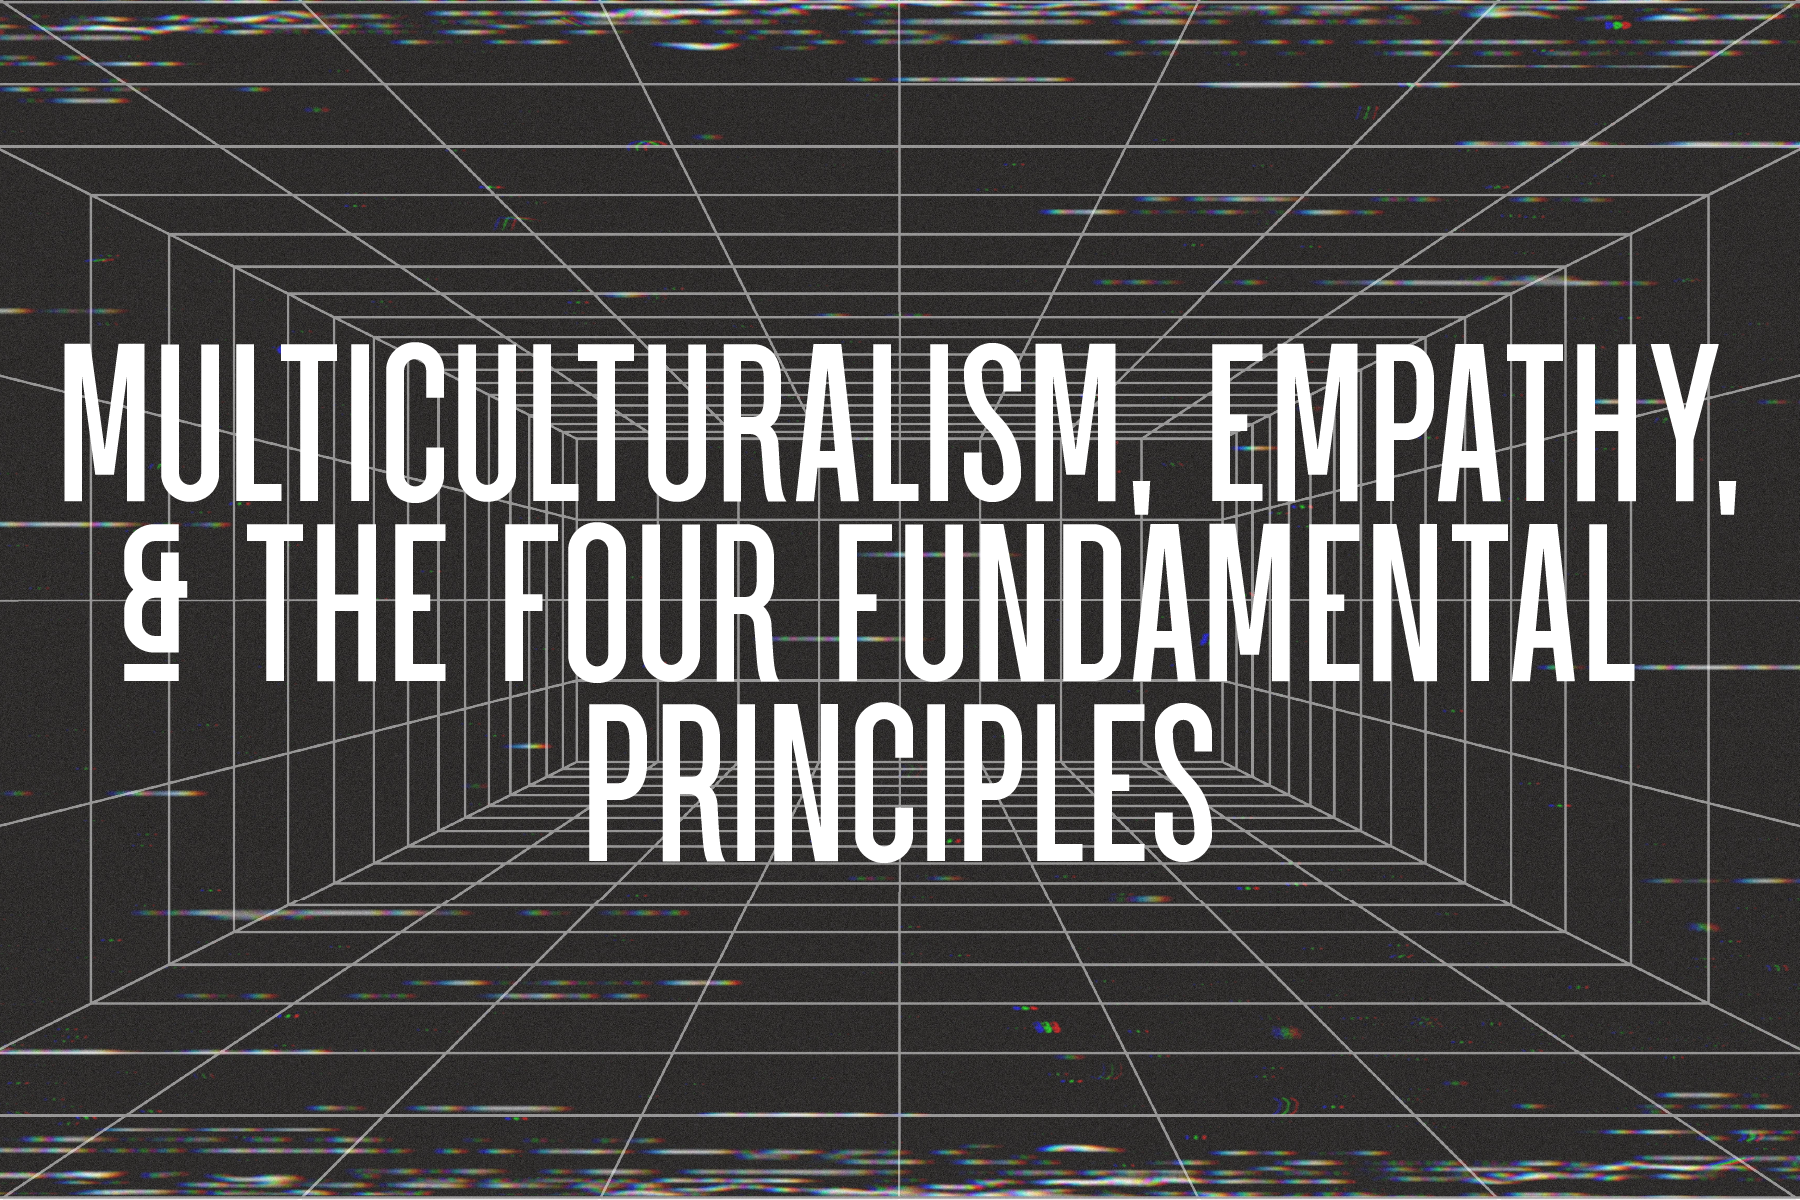 Multiculturalism, Empathy and the Four Fundamental Principles